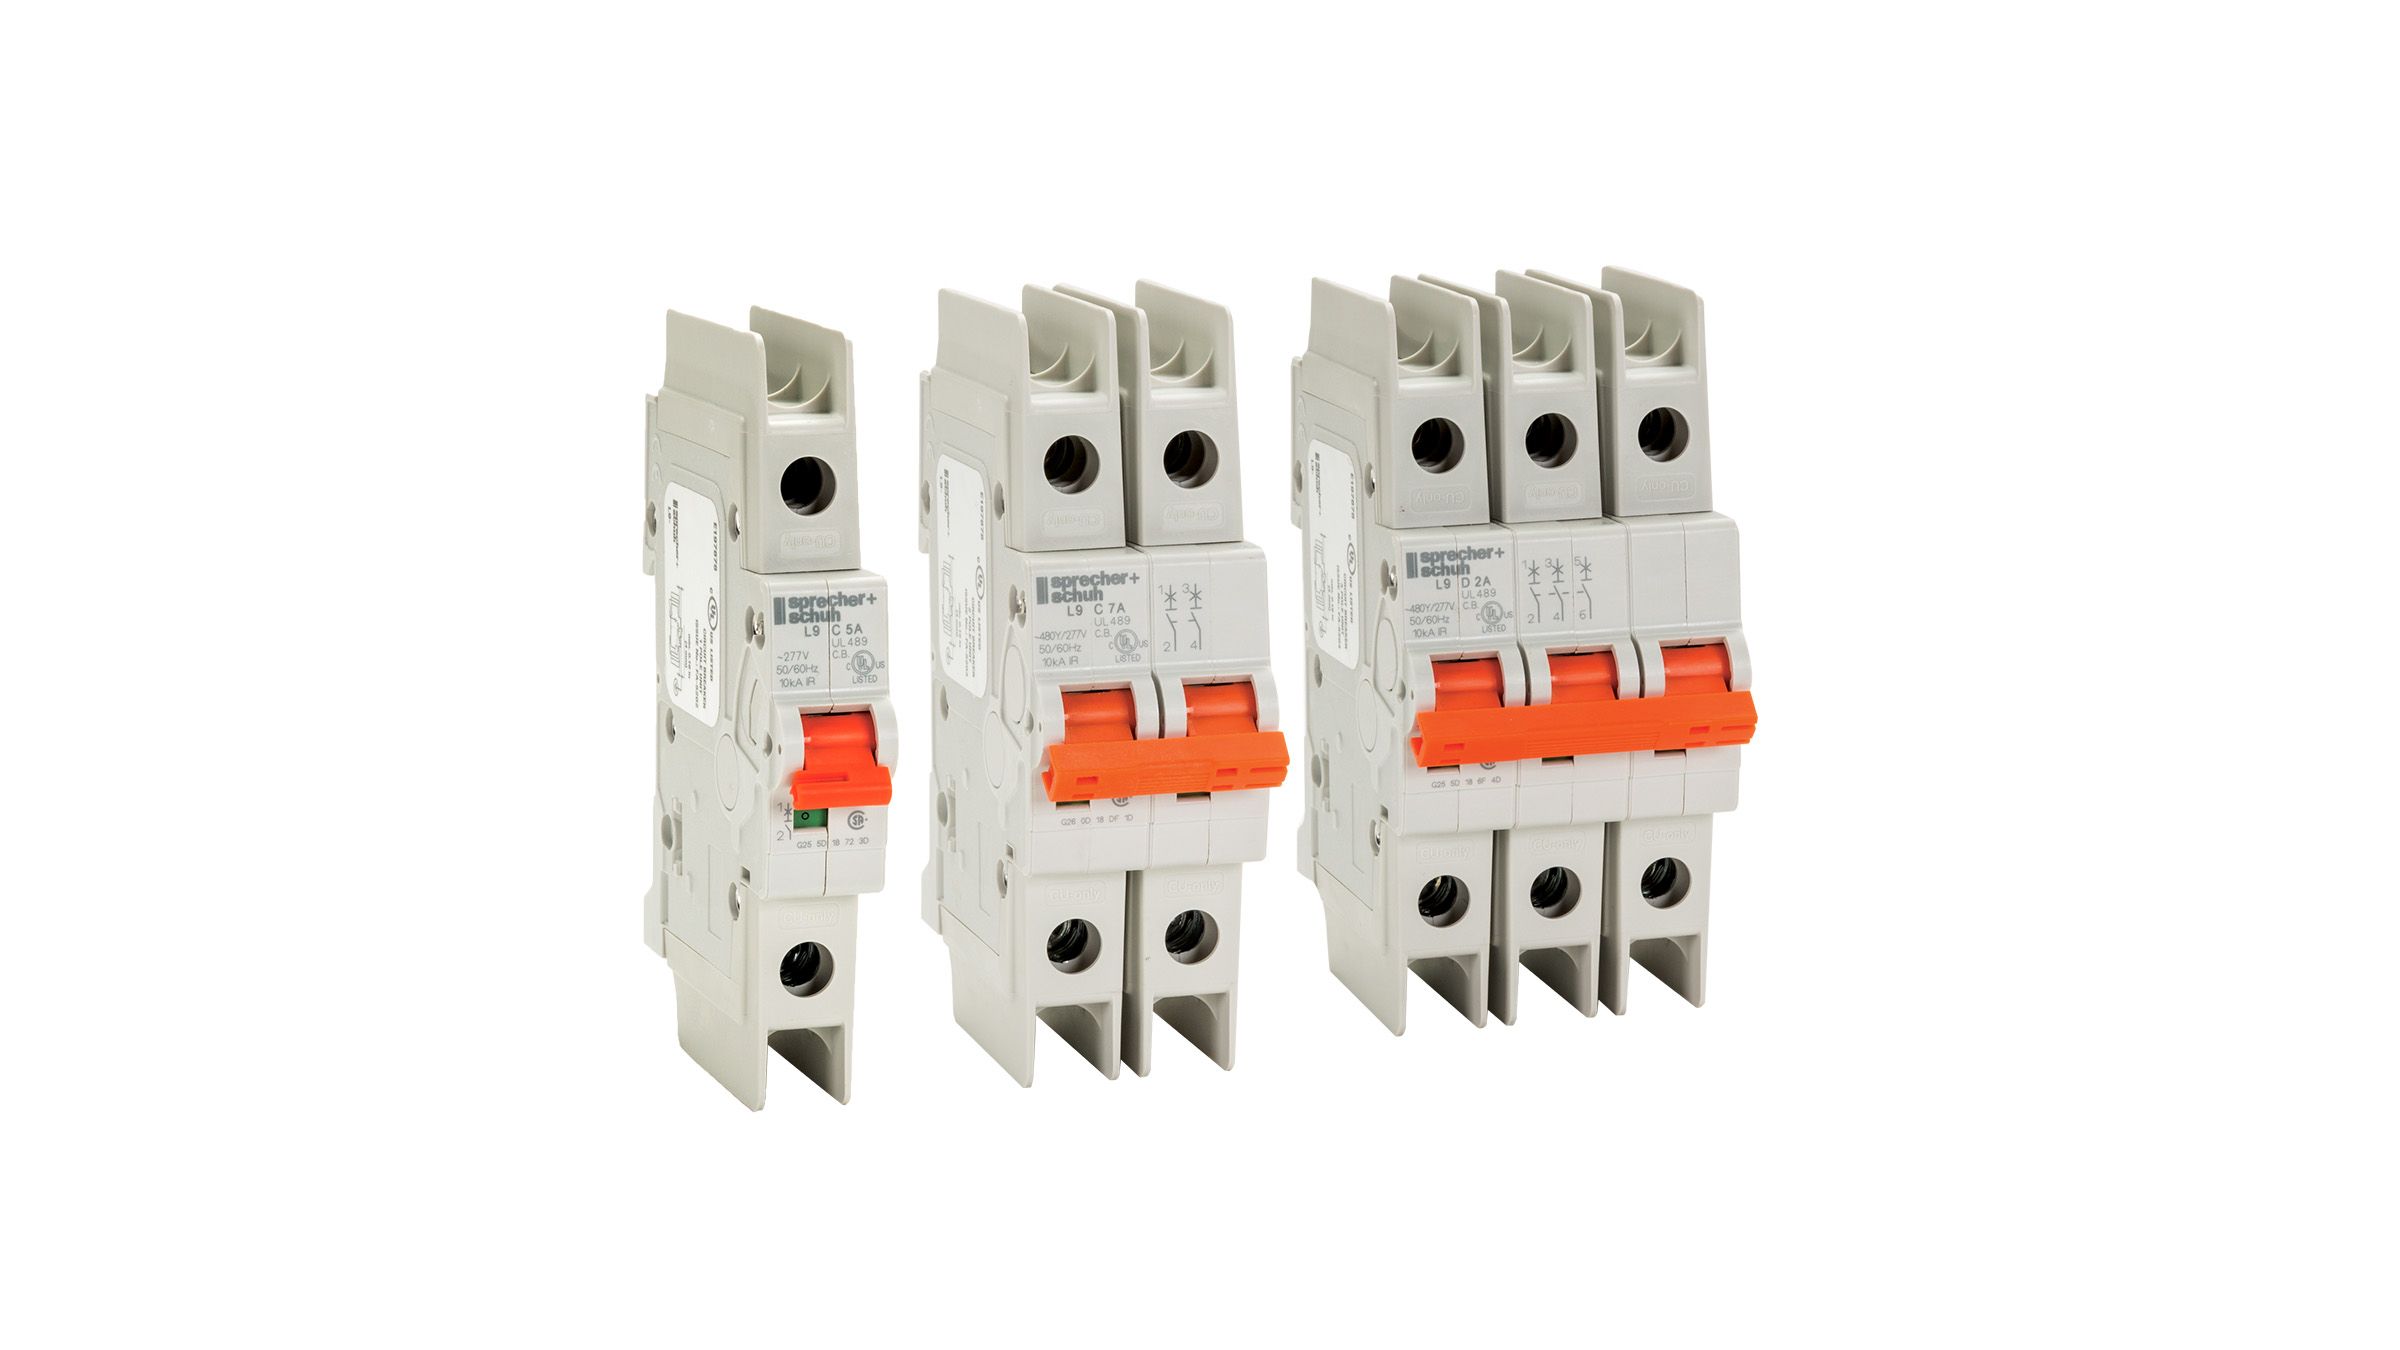 UL489 Miniature Circuit breakers for branch circuit protection up to 63 amps.